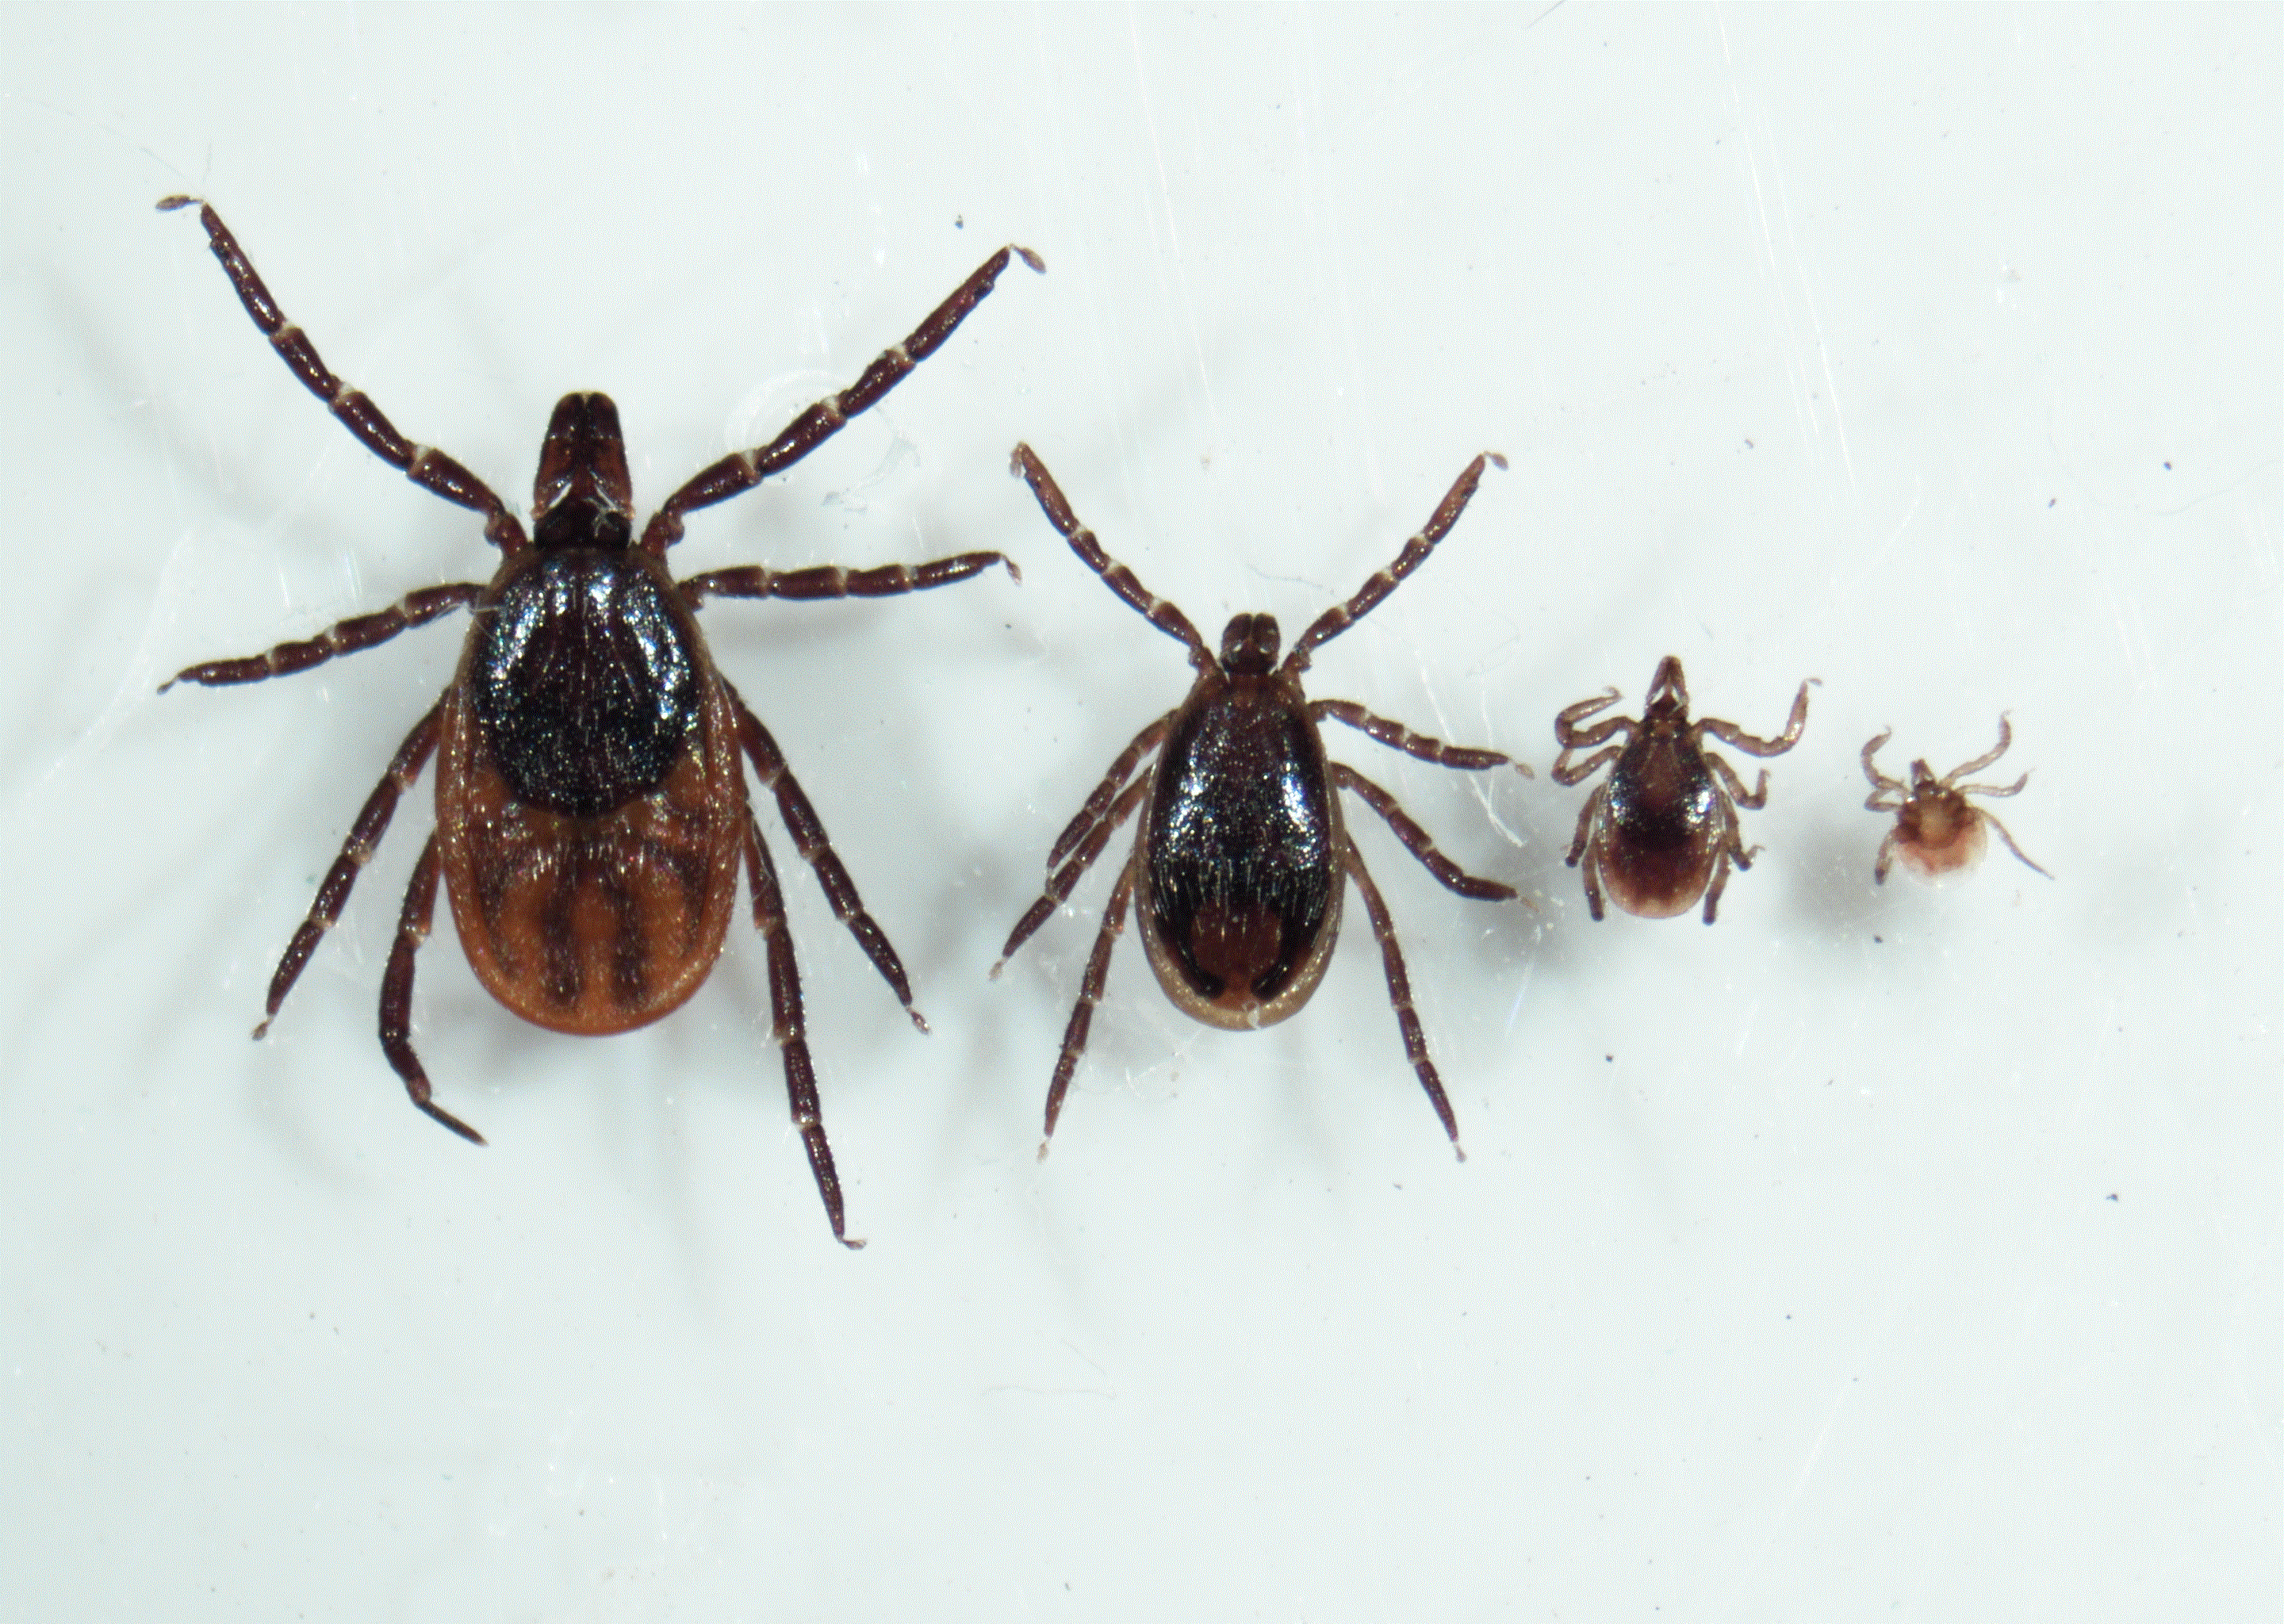 Ixodes scapularis magnified. Left to right: Adult female, adult male, nymph, larva. Photo: Lee Green, Indiana State Department of Health.